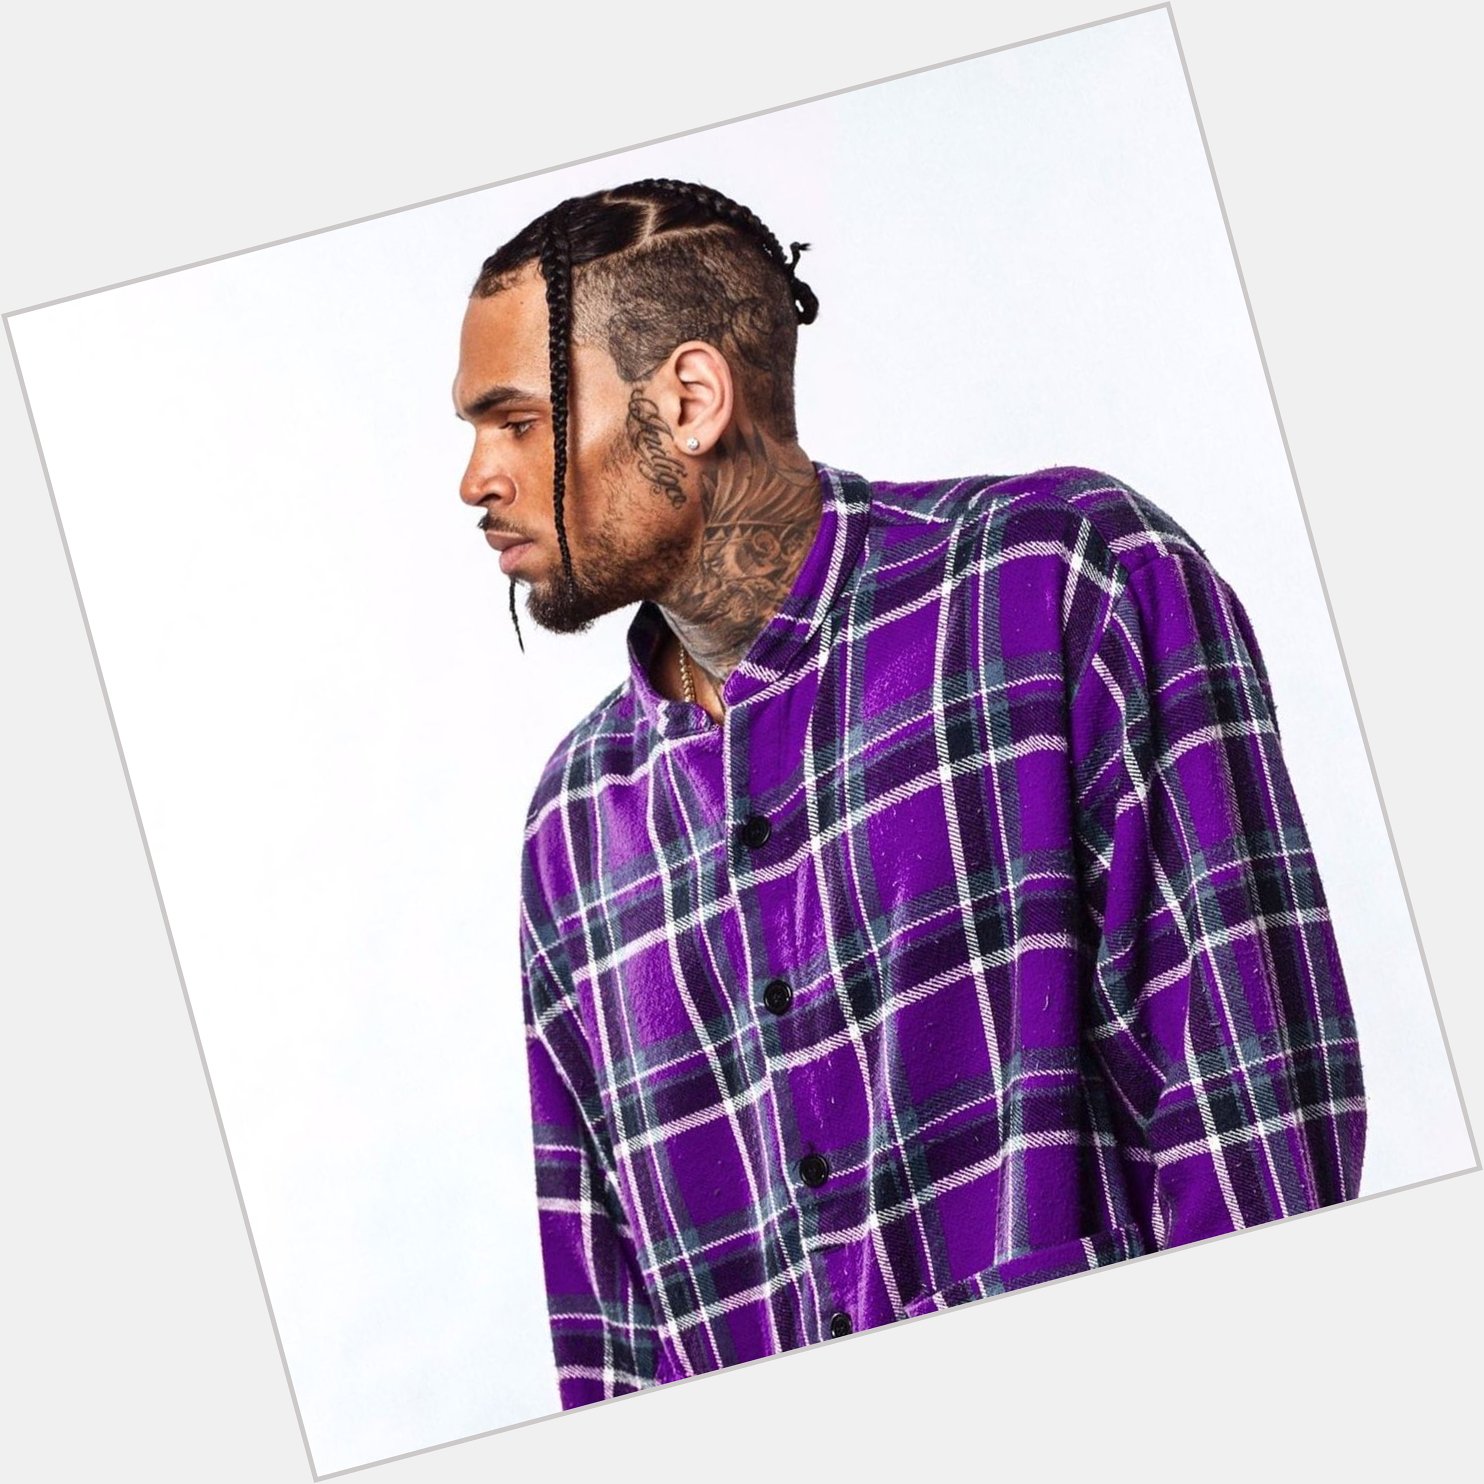 Happy 33rd birthday to a singer, rapper & dancer Chris Brown 